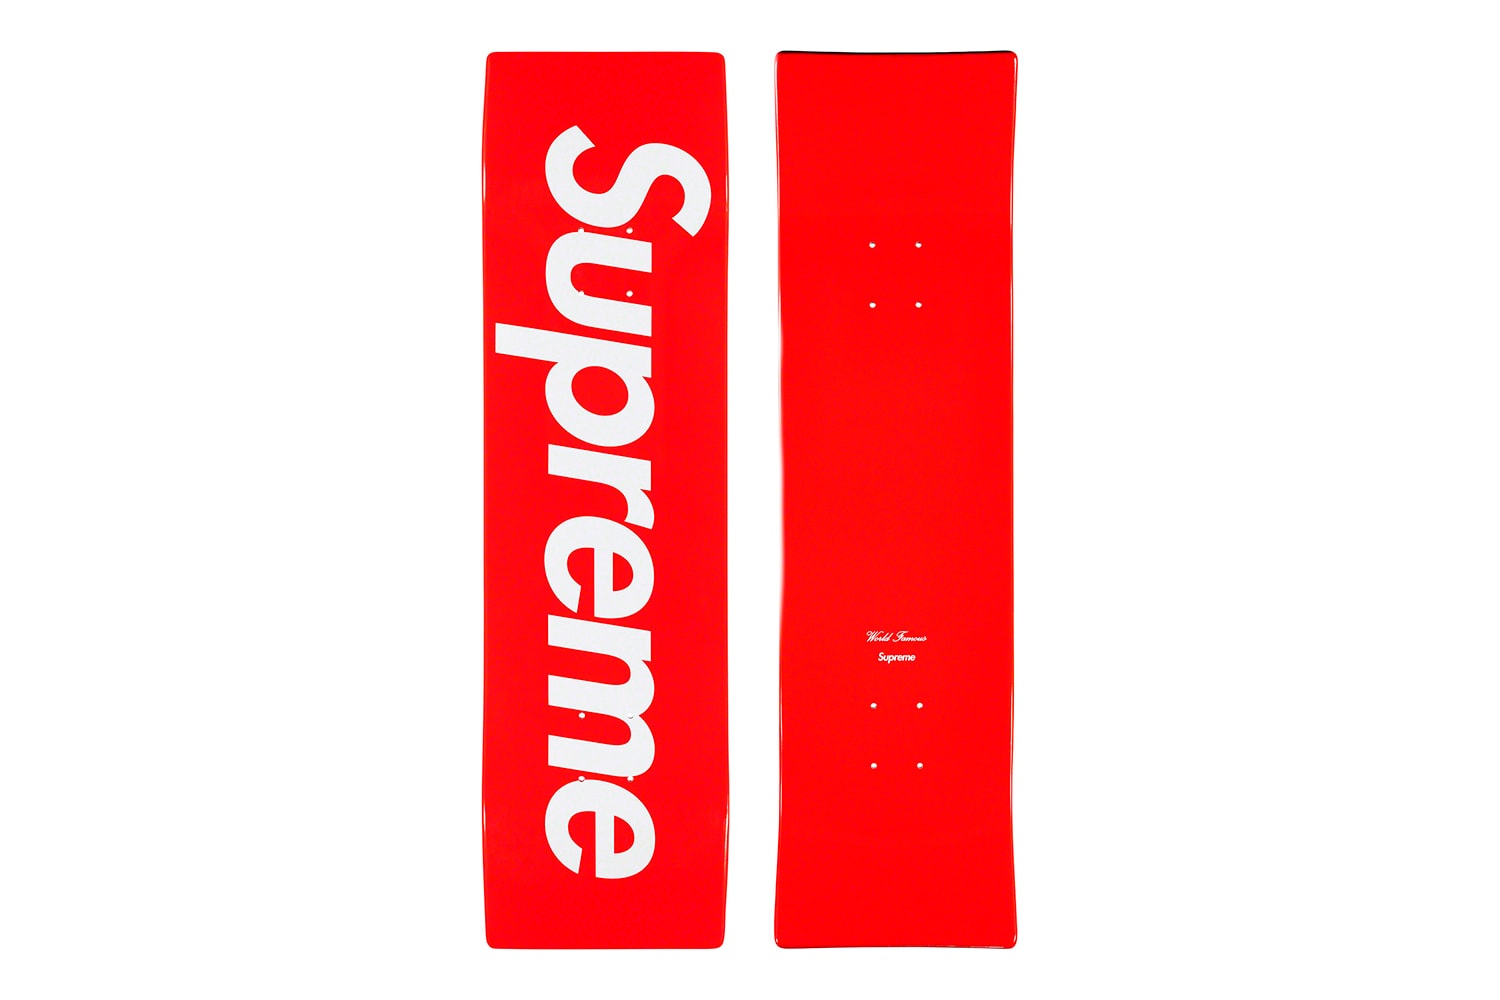 Supreme Spring Summer 2022 Week 4 Release List Drop List Palace Hennessy Afield Out Harley Davidson Todd Snyder Lacoste Minecraft 다다DADA多多 SKP-S C.P. Company Clarks Originals